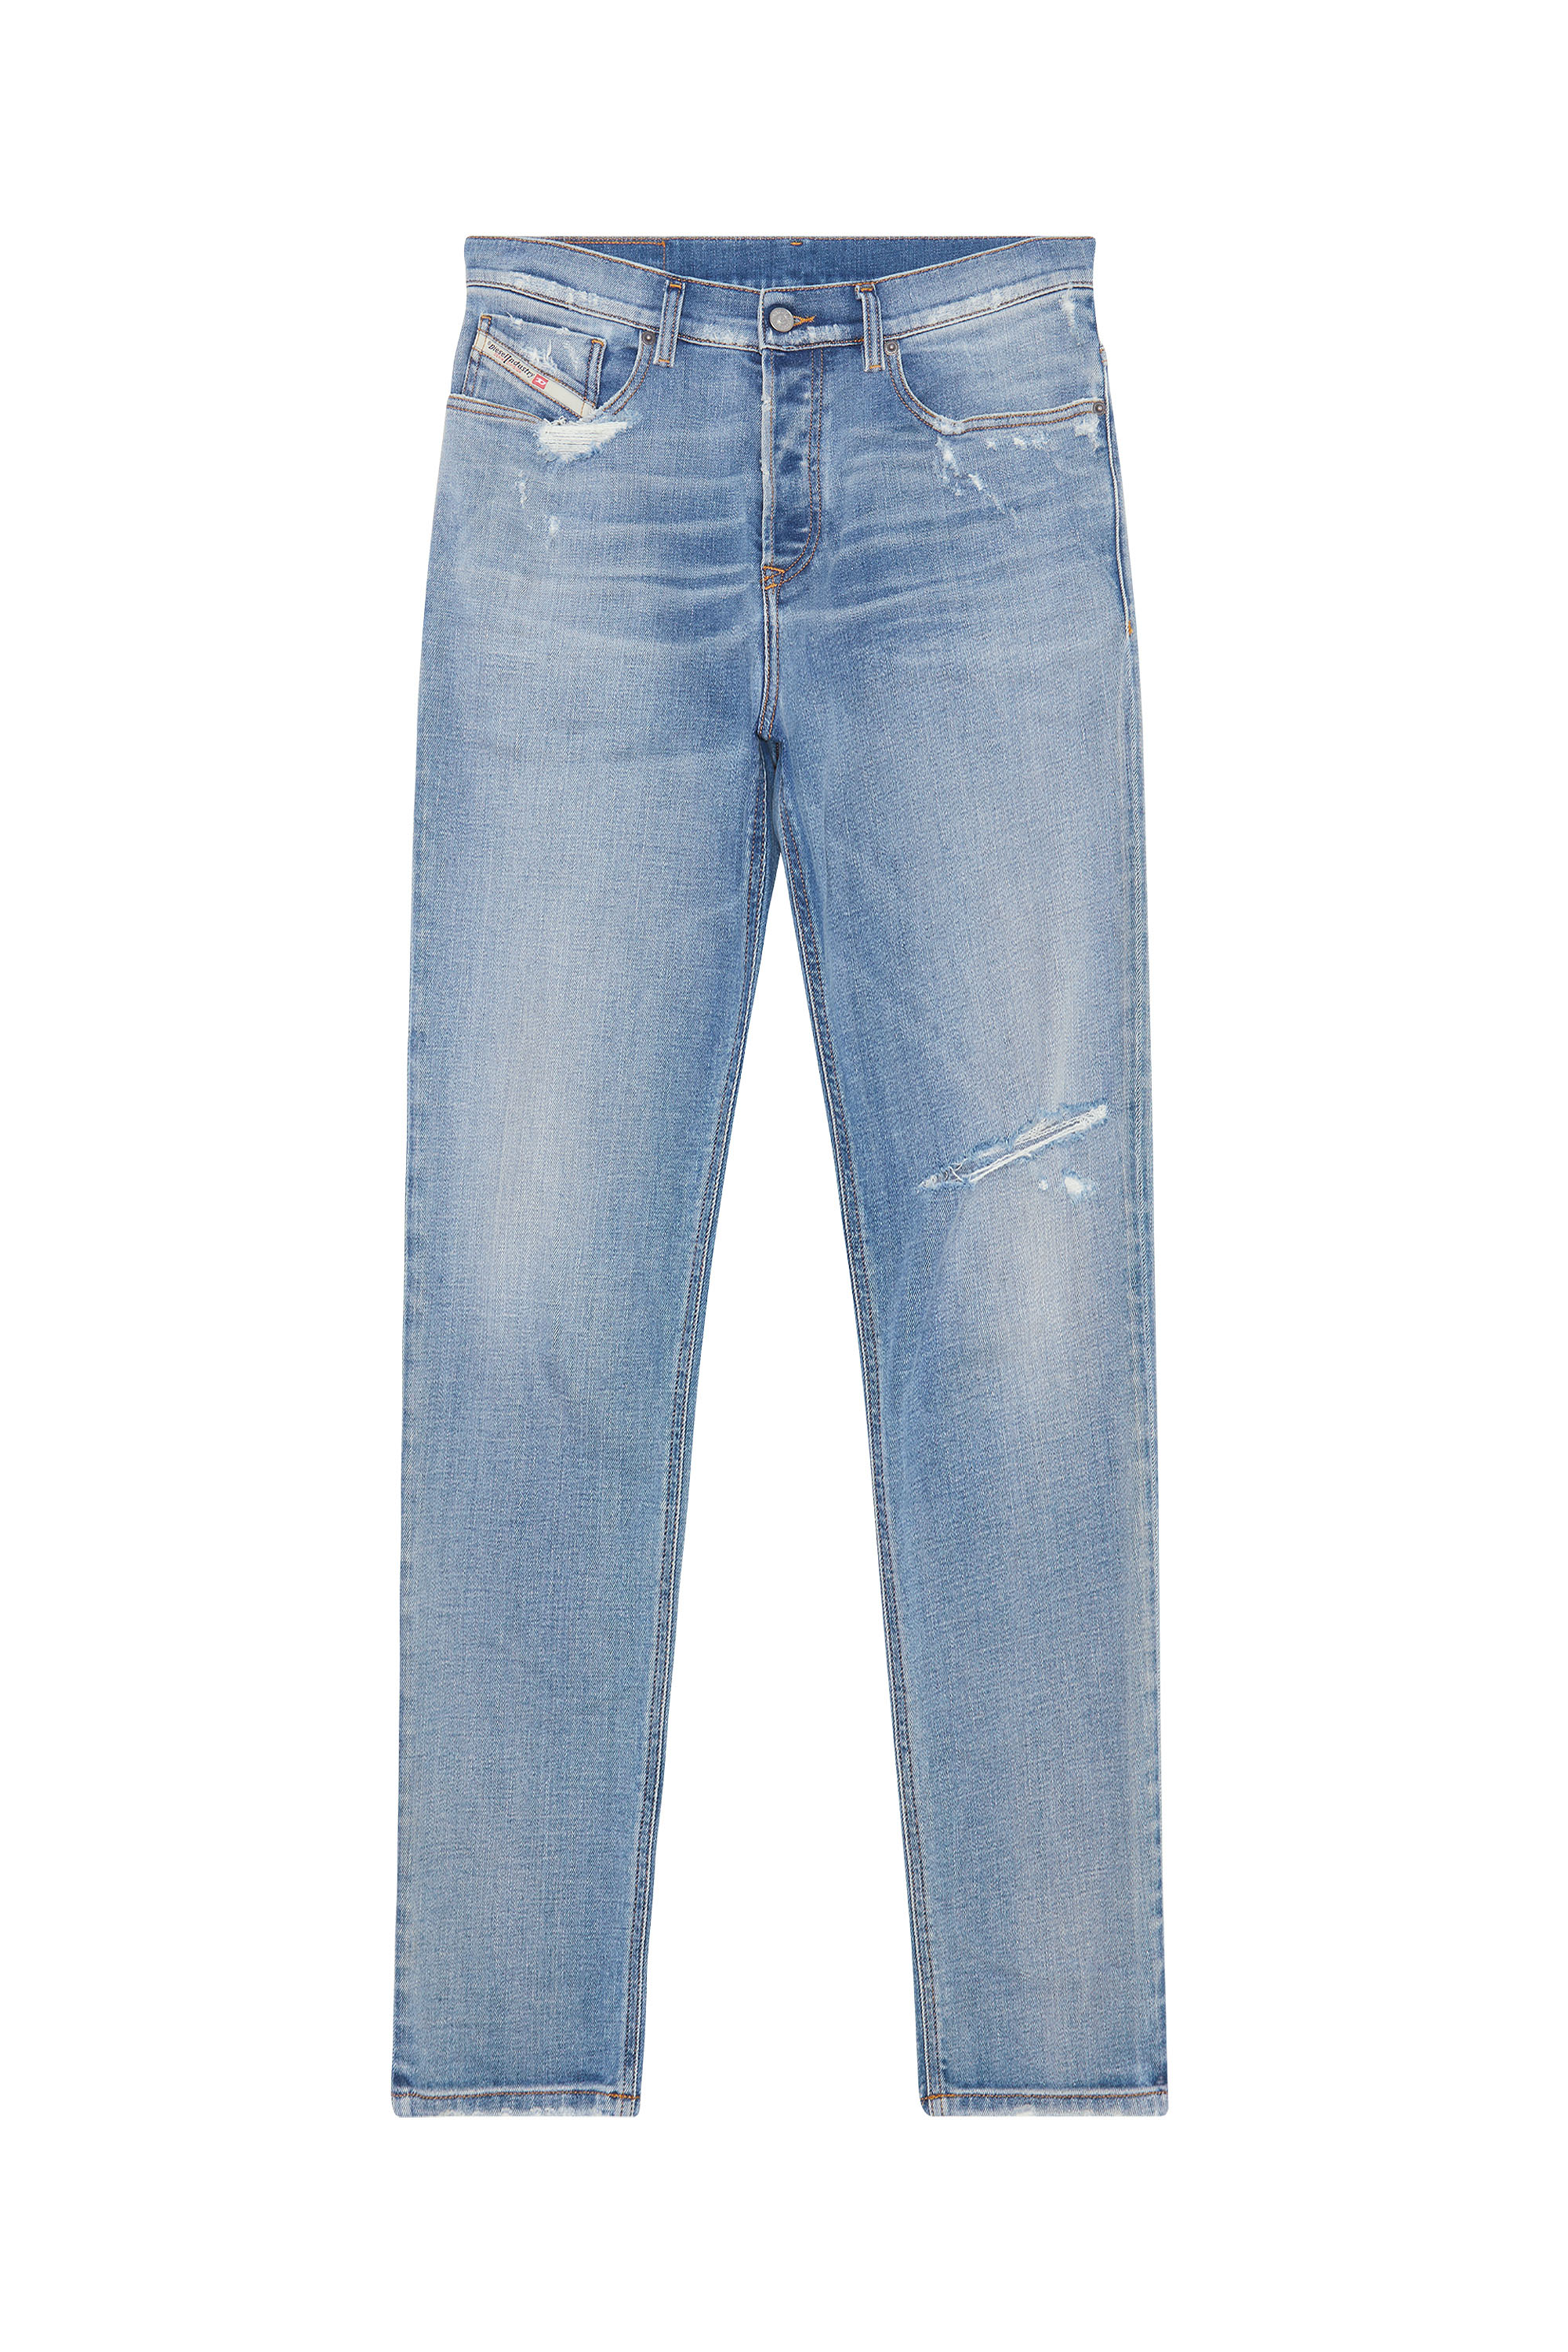 2005 D-FINING 09E17 Tapered Jeans, Bleu Clair - Jeans